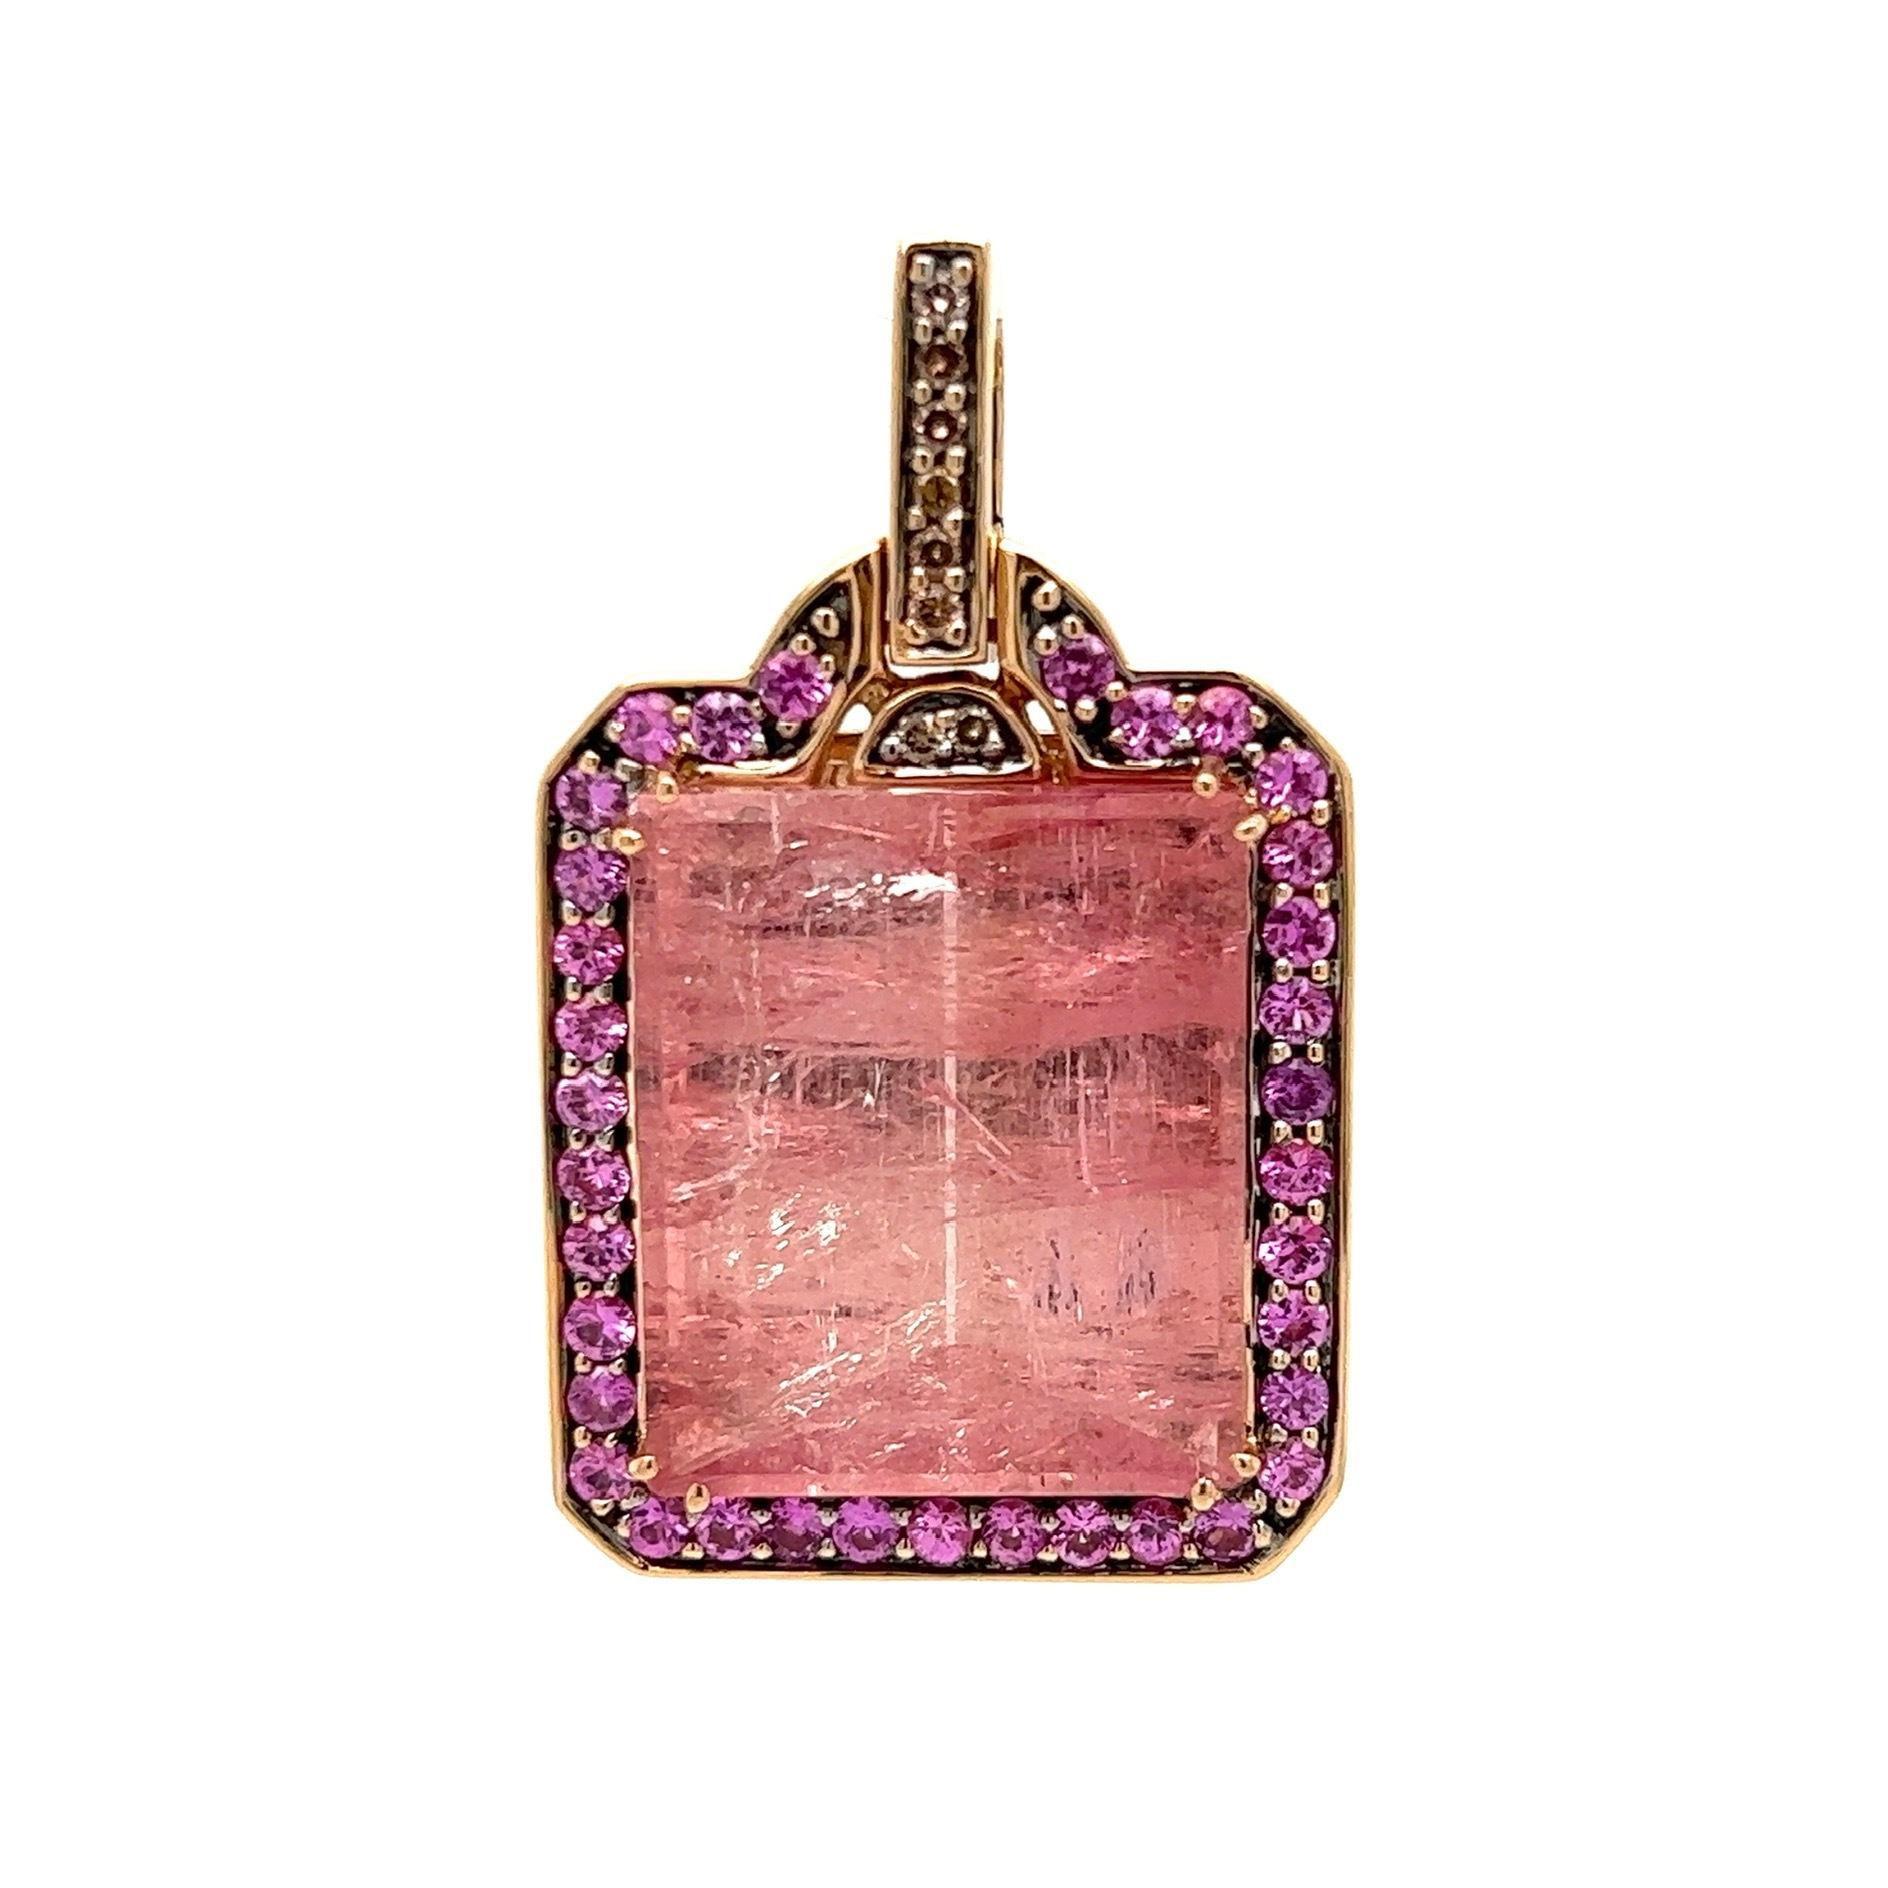 Simply Beautiful 25 Carat Pink Tourmaline and Sapphire Designer Pendant Necklace by Robert Wander. Center securely Hand set with a 25 Carat Pink Tourmaline surrounded by Pink Sapphires. Hand crafted in 18K Yellow Gold. Marked, 750, WINC. Suspended